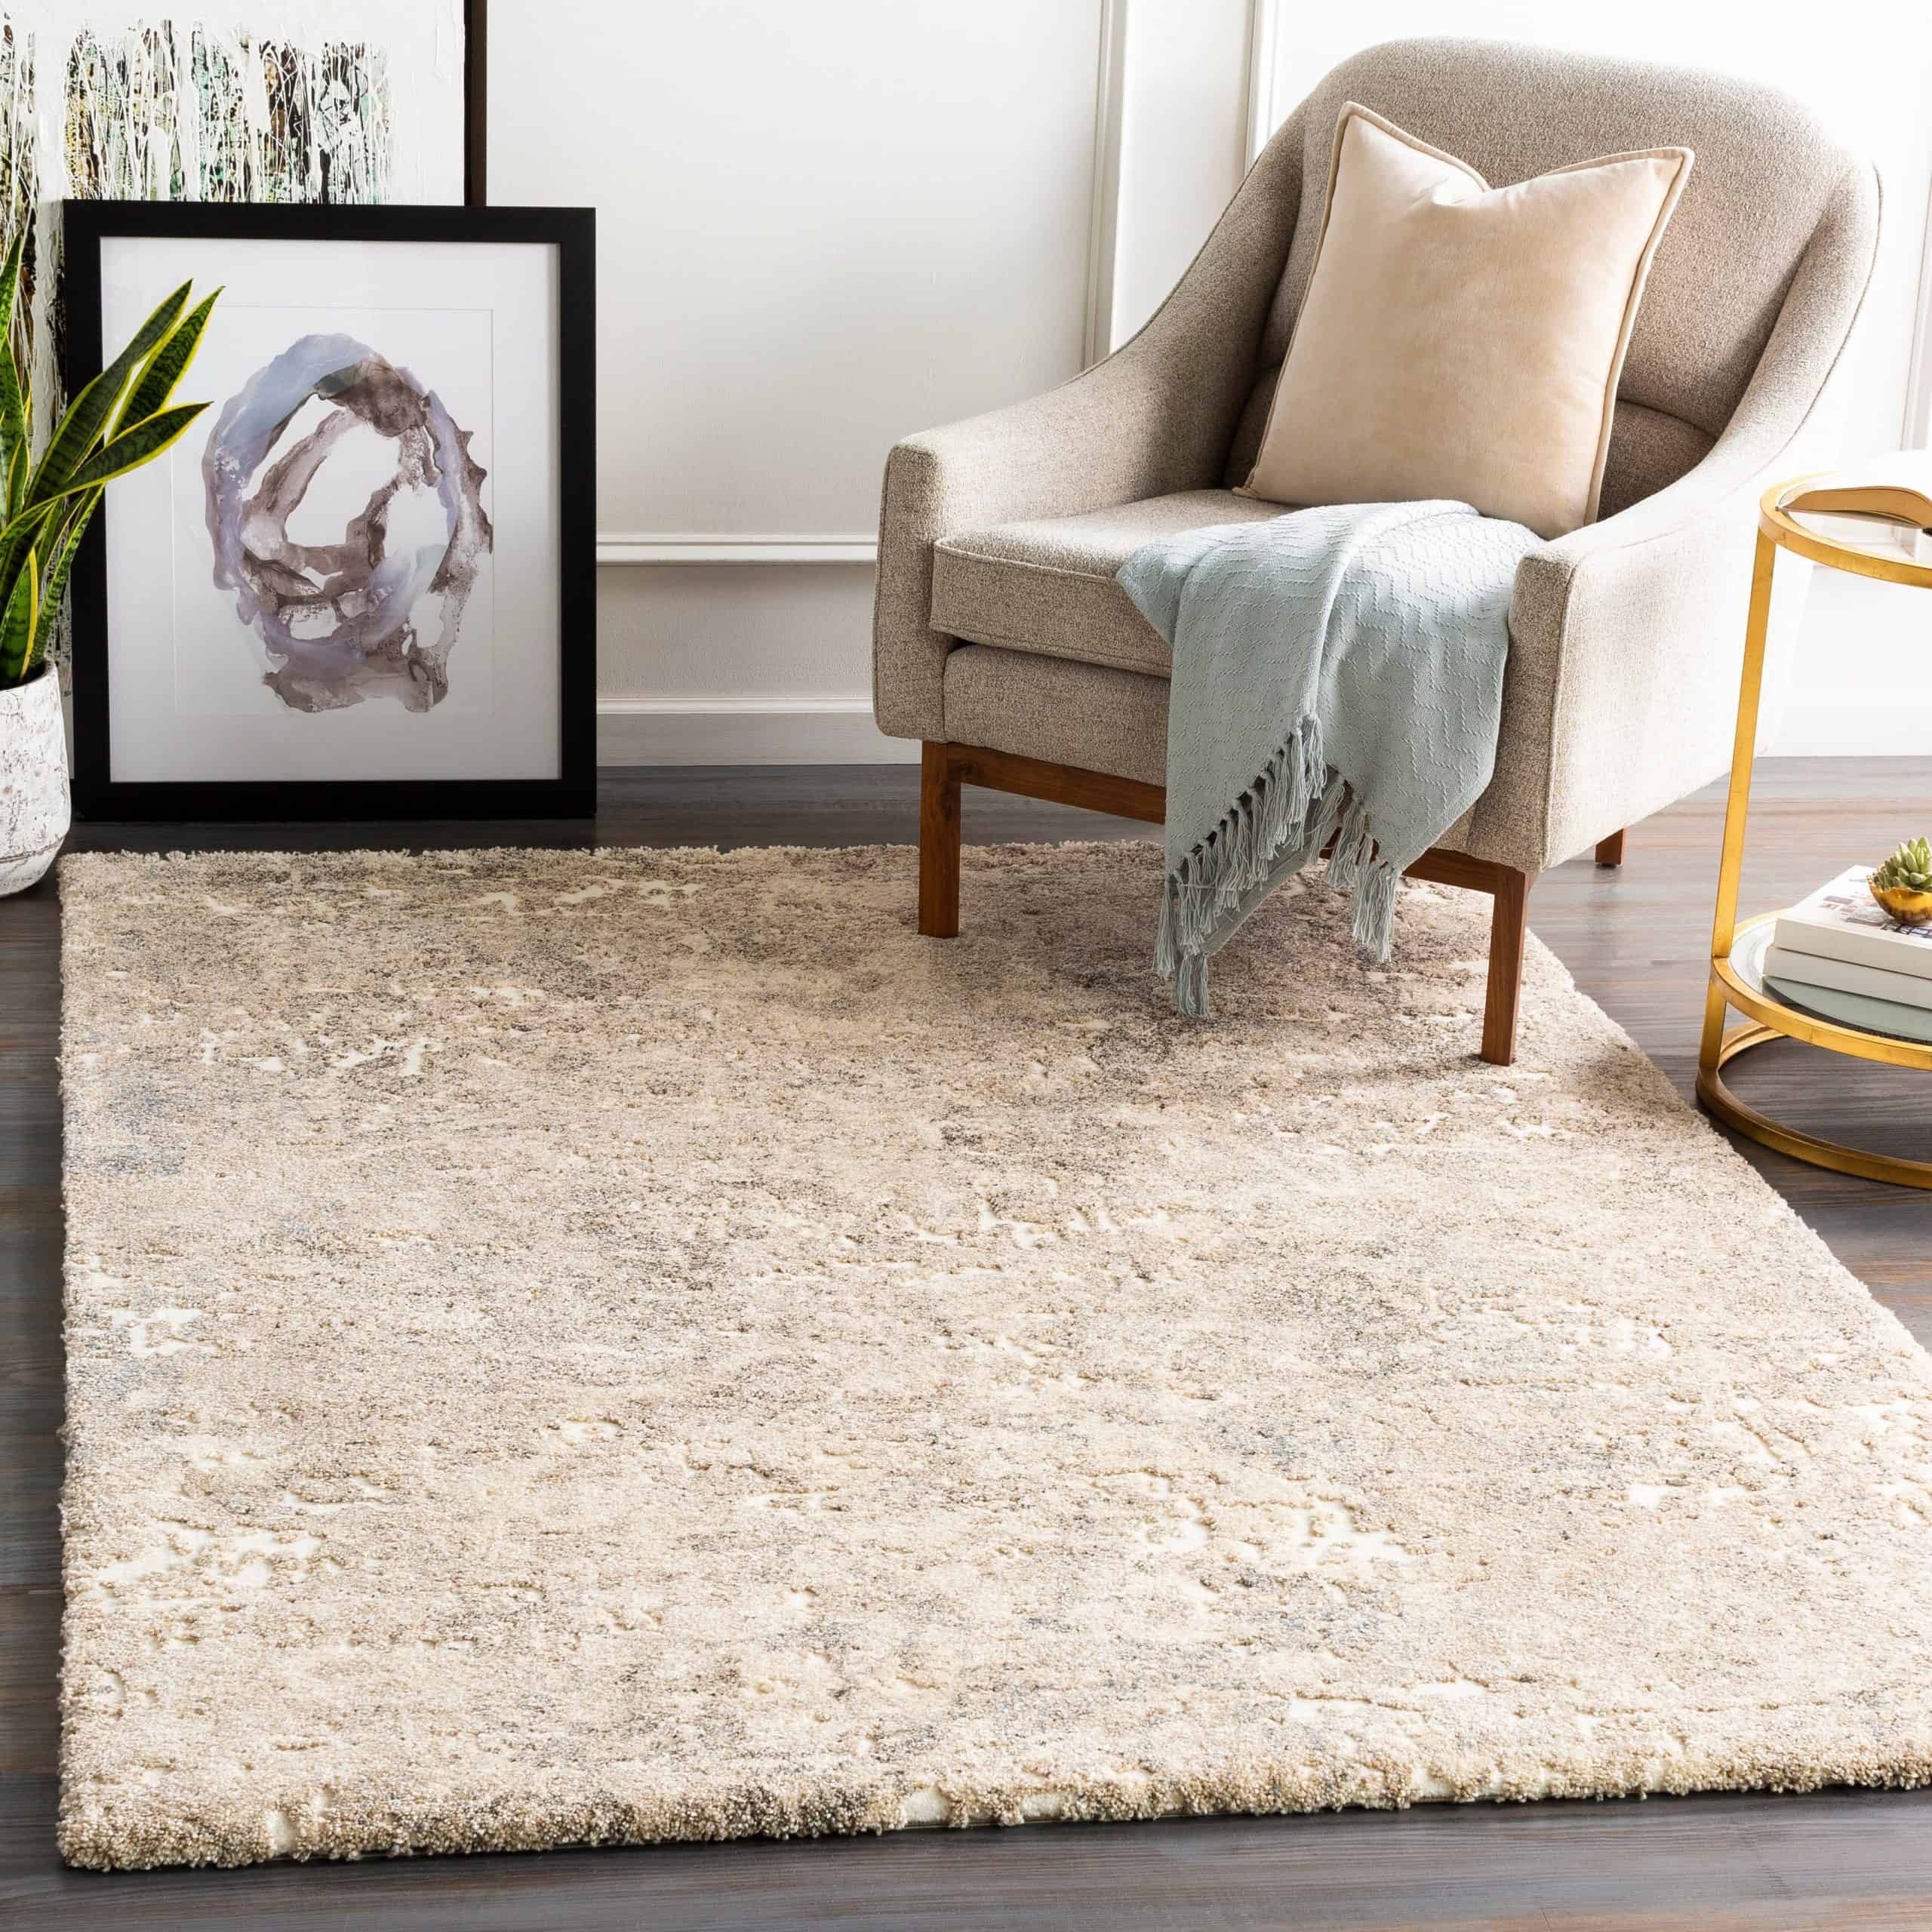 Add A Stylish Area Rug To Divide Space In Your Bedroom